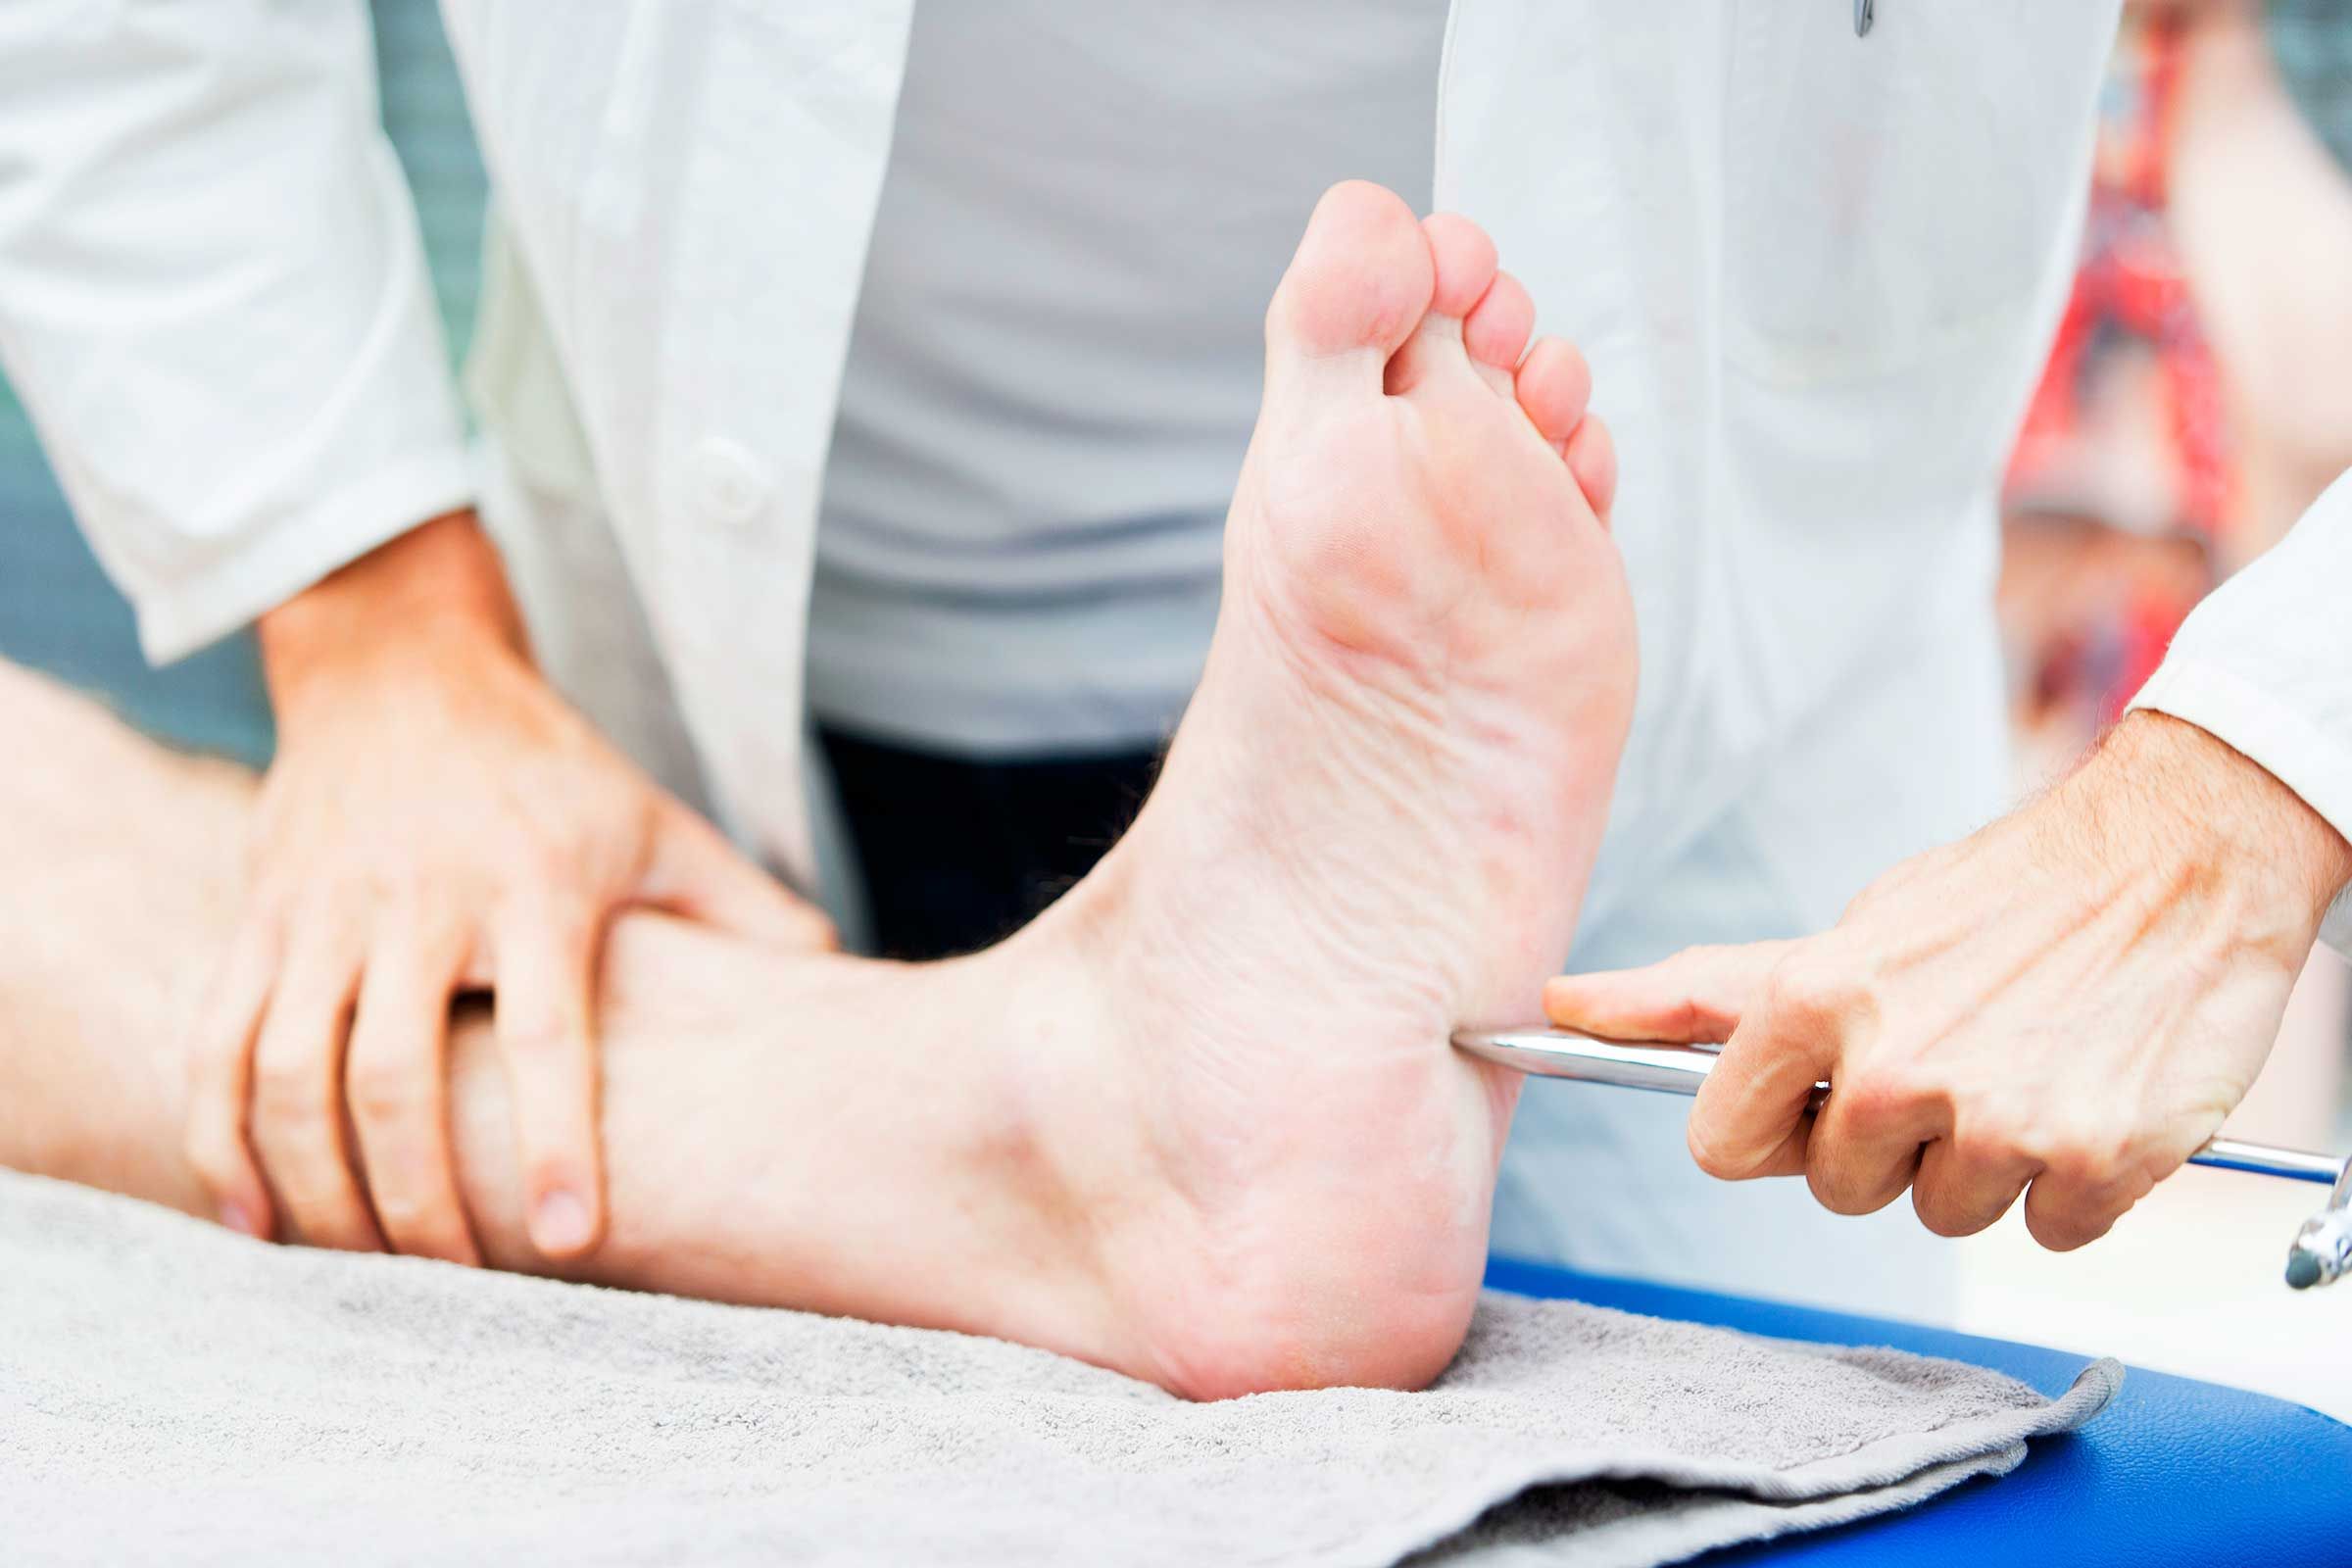 Diabetic Neuropathy Market Is Estimated To Witness High Growth Owing To Rising Prevalence of Diabetes and Increasing Research & Development Activities